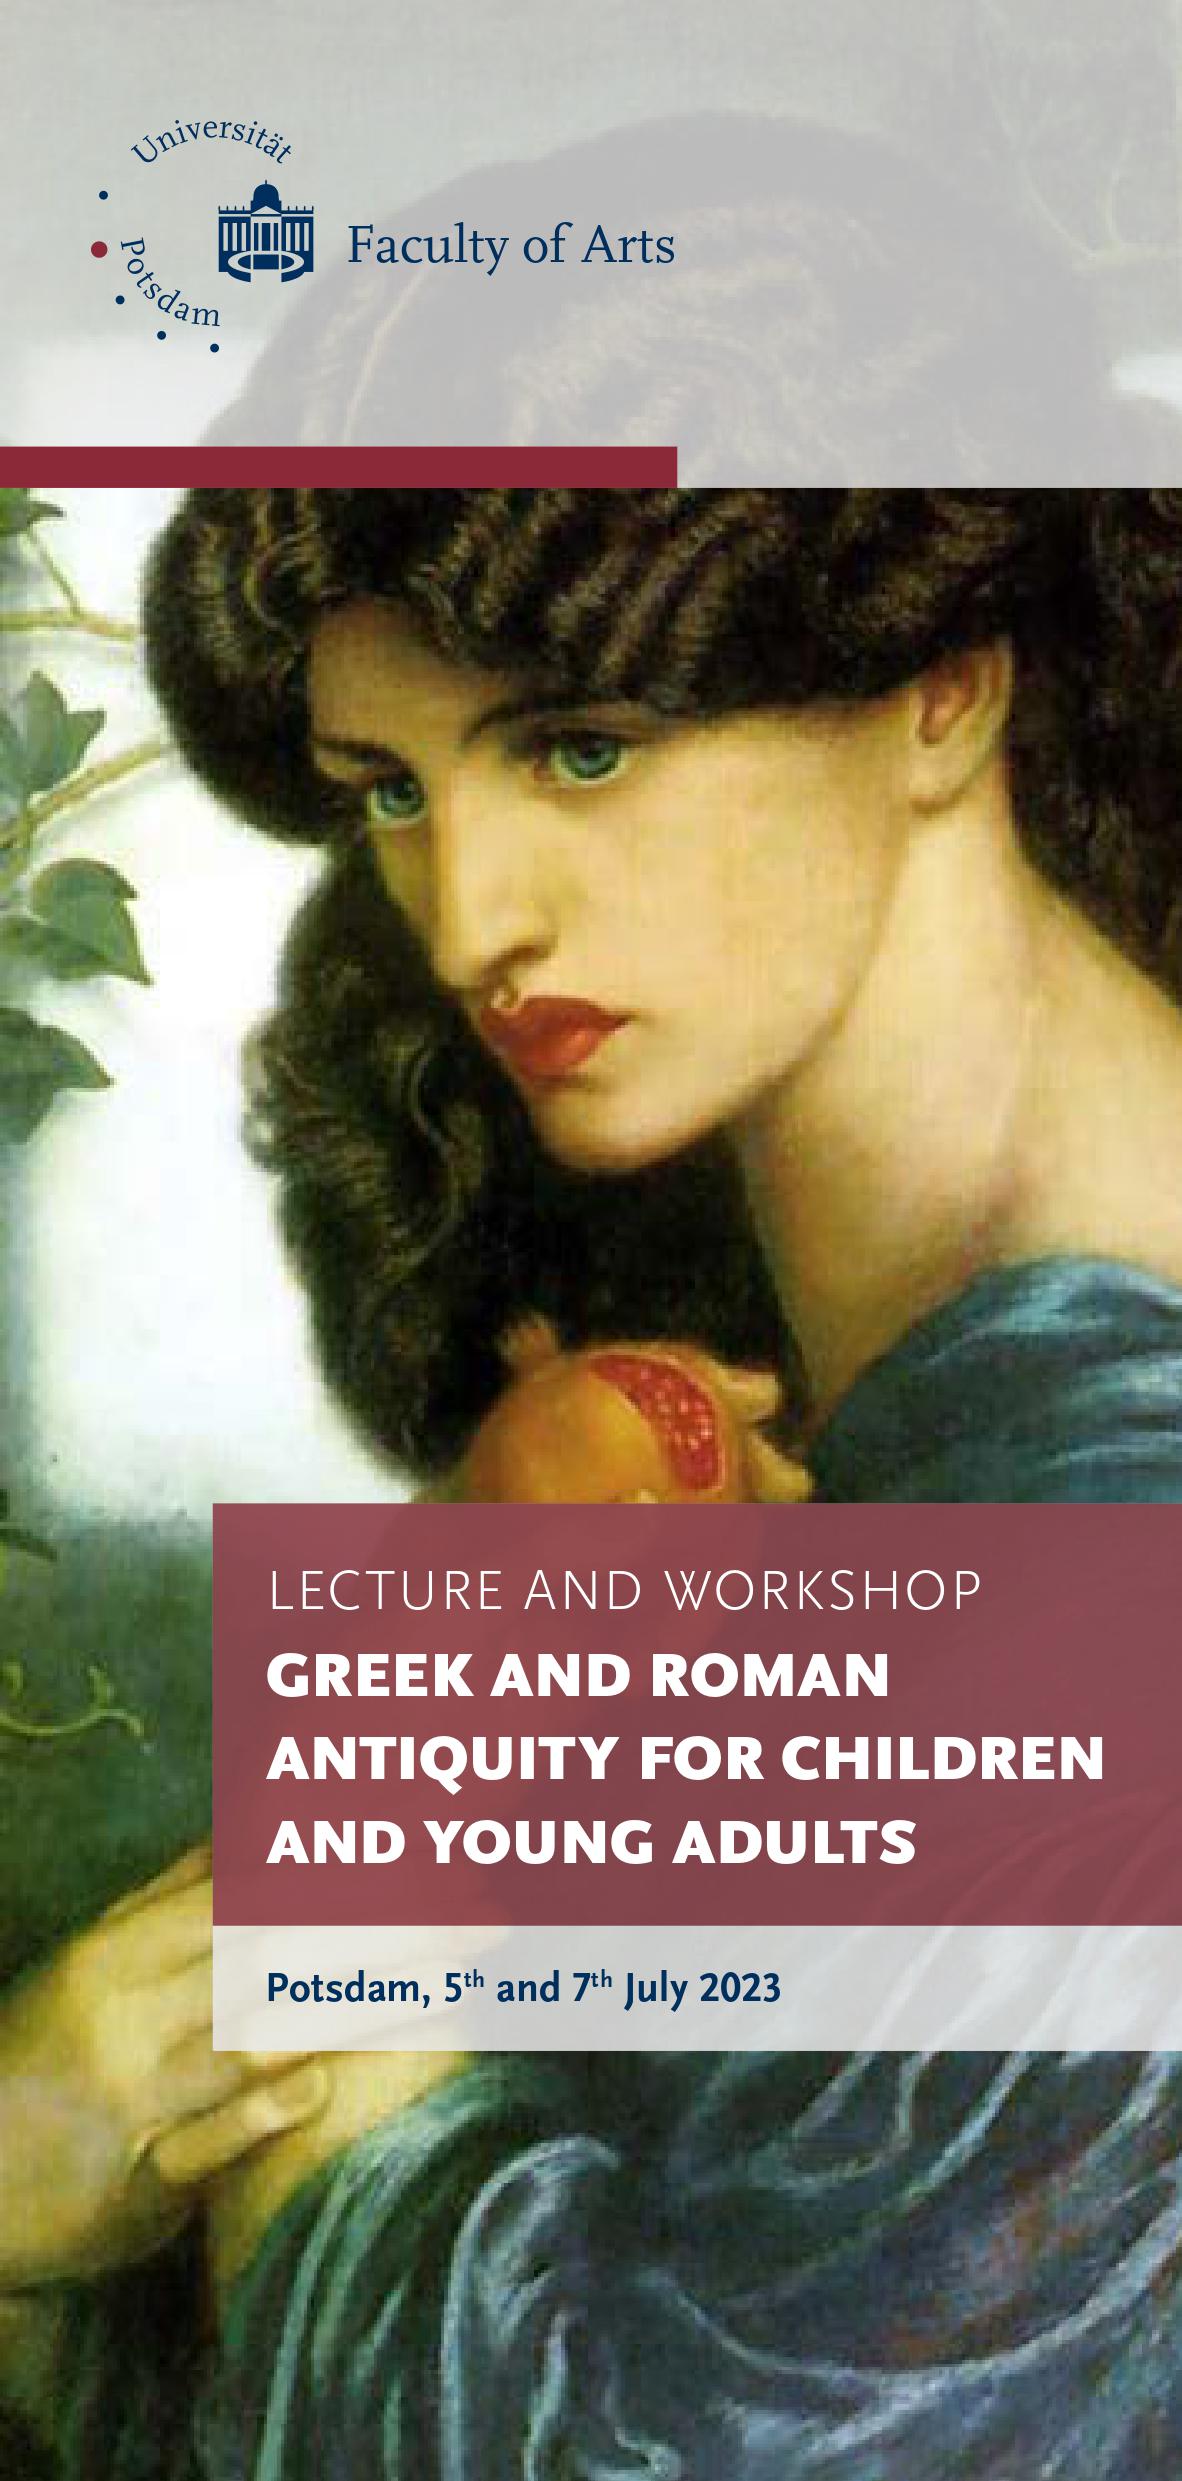 Greek and Roman Antiquity for Children and Young Adults. Poster. July 2023